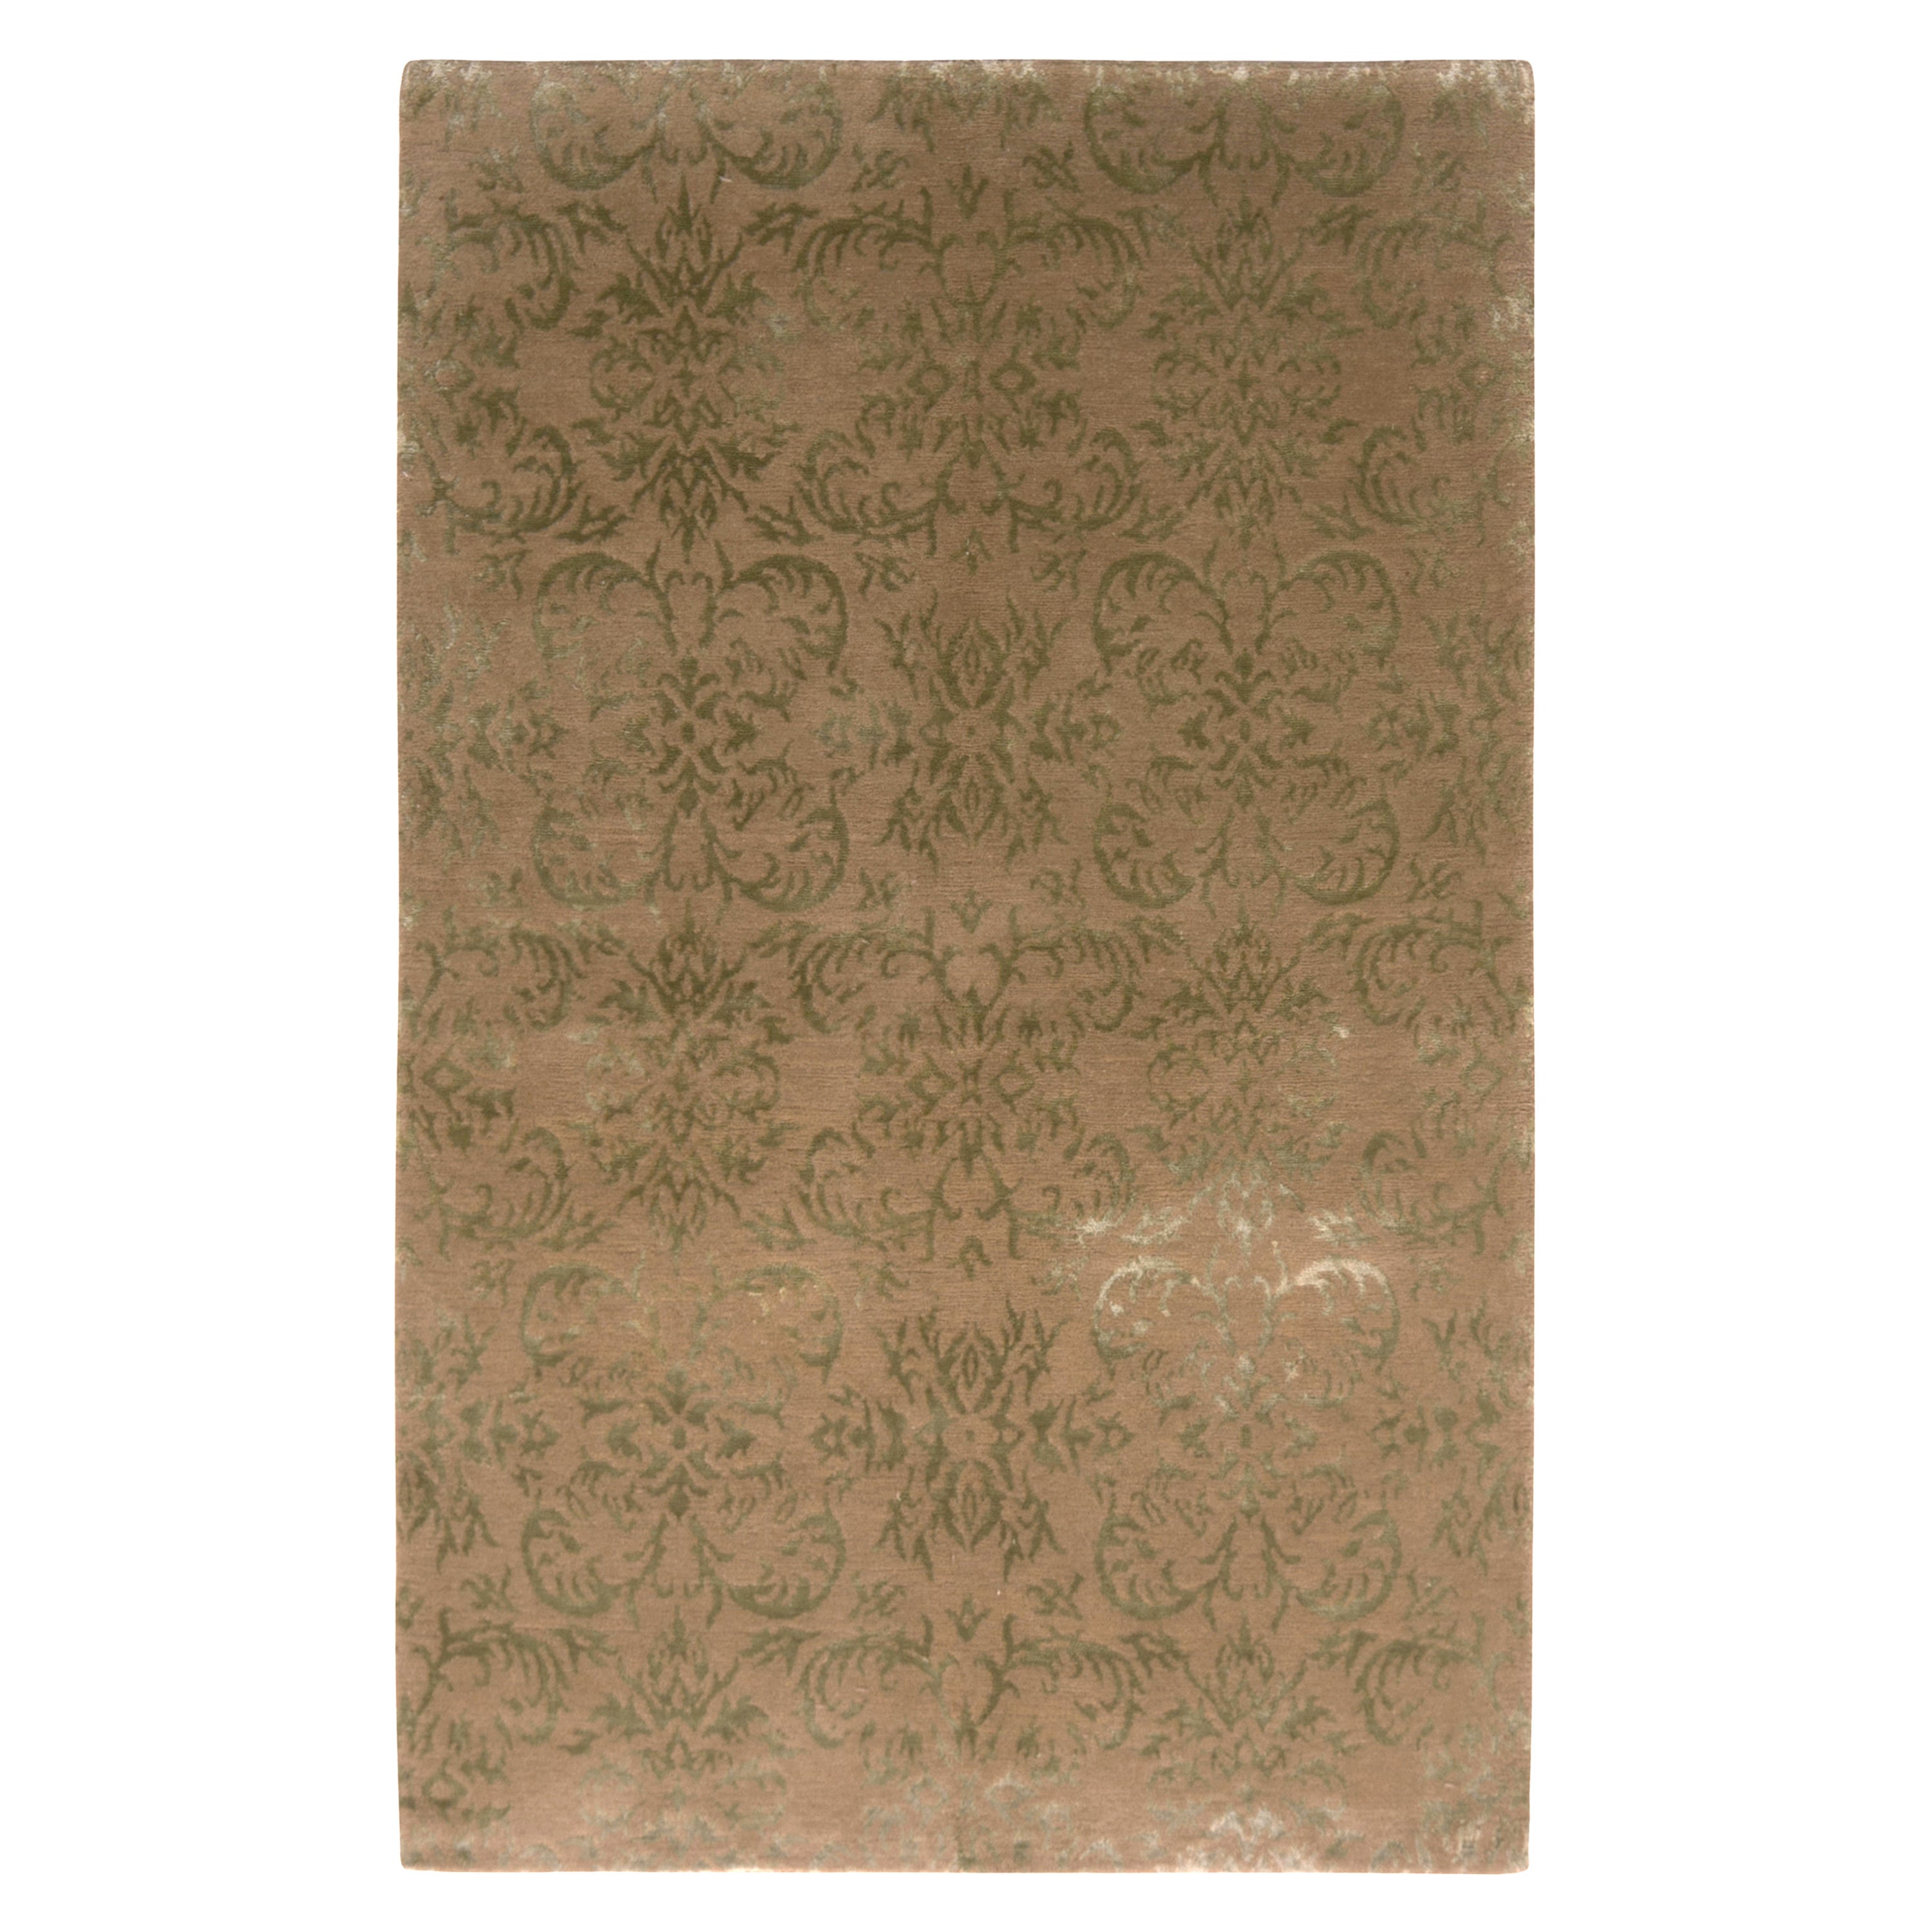 Rug & Kilim's Hand Knotted European Style Rug Beige-Brown Green Floral Pattern